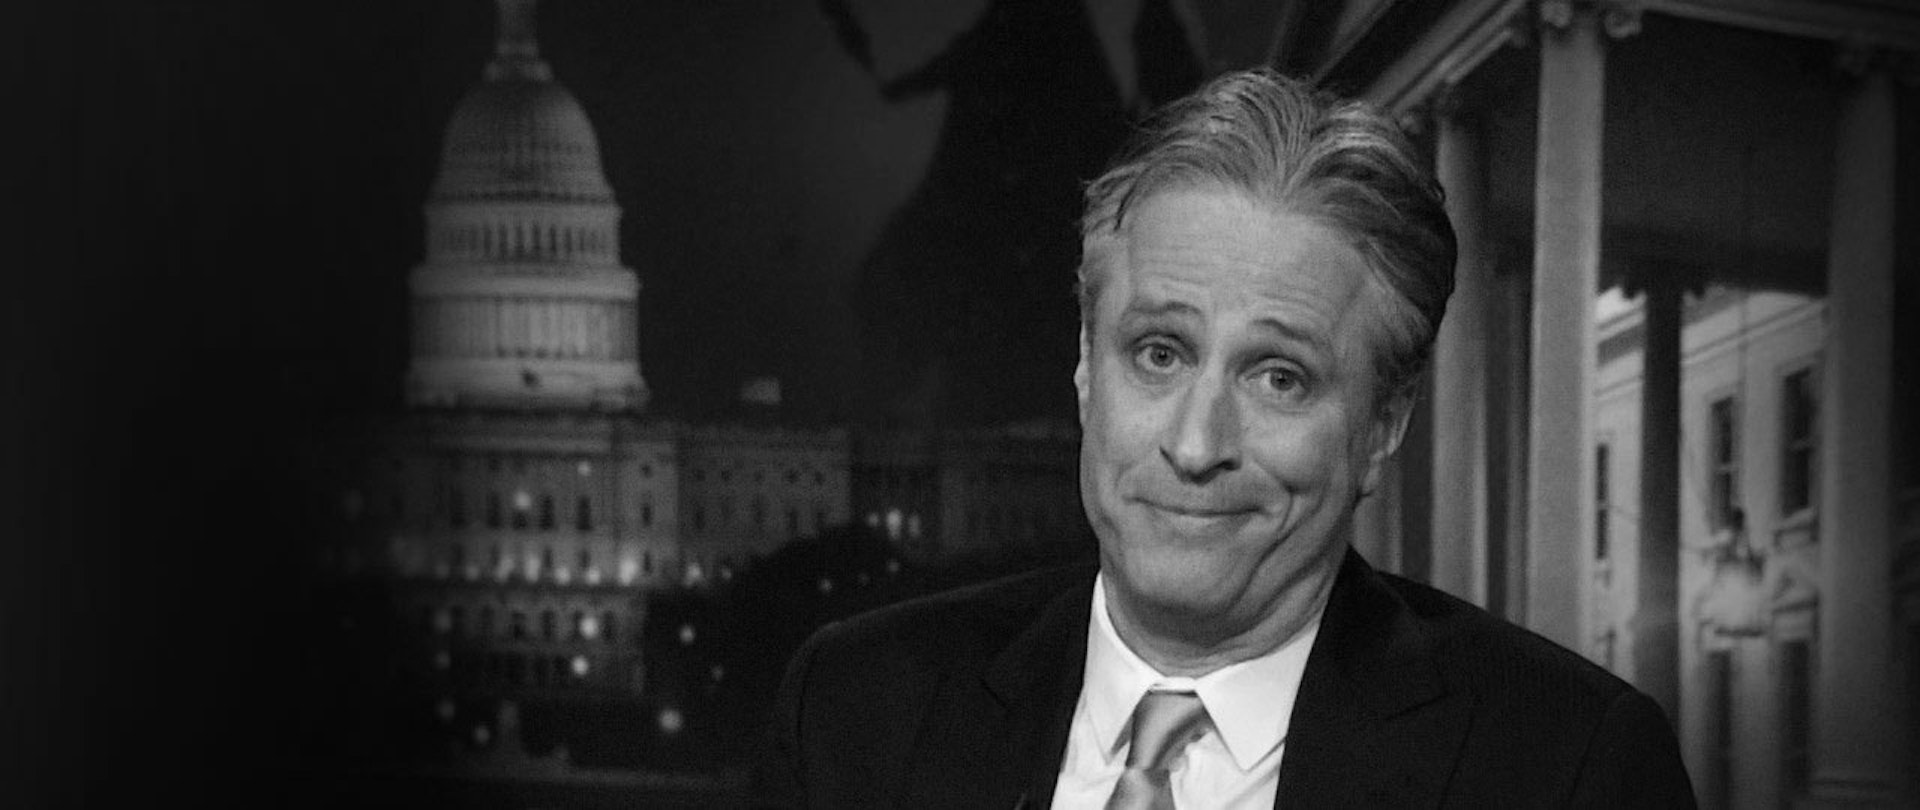 As Jon Stewart quits the Daily Show we look back on his best moments